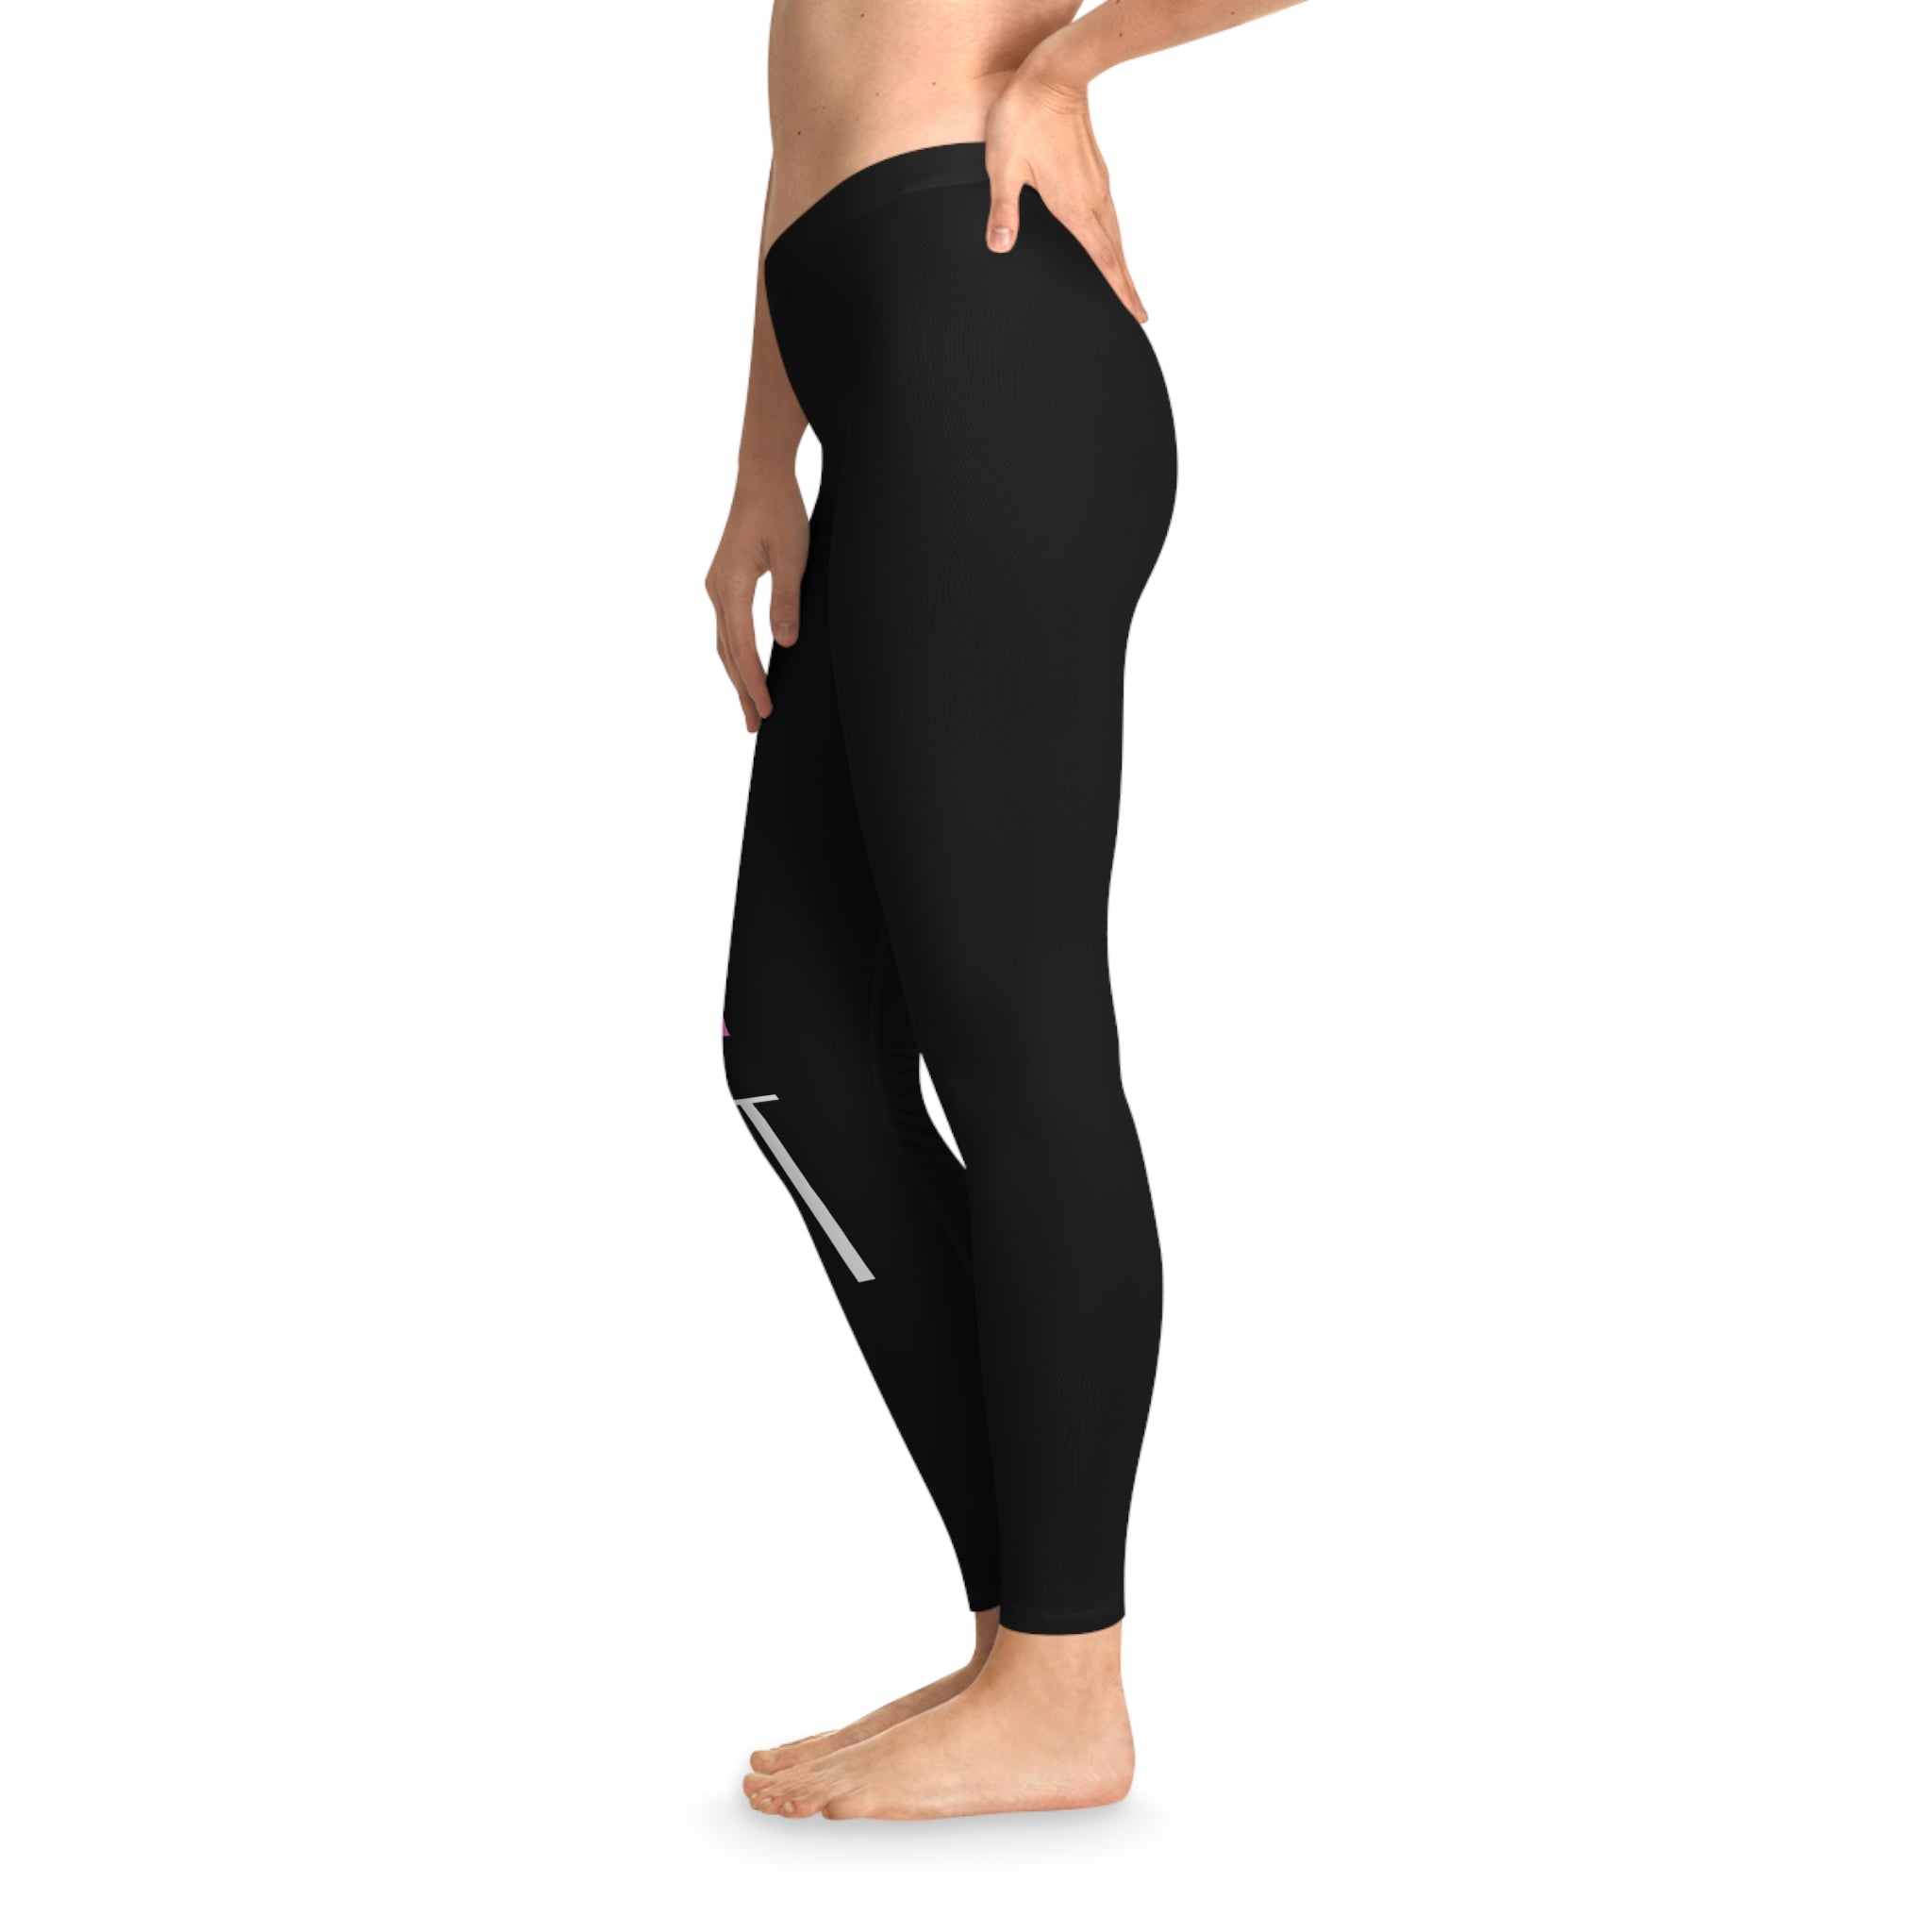 Push Your Limit Stretchy Leggings